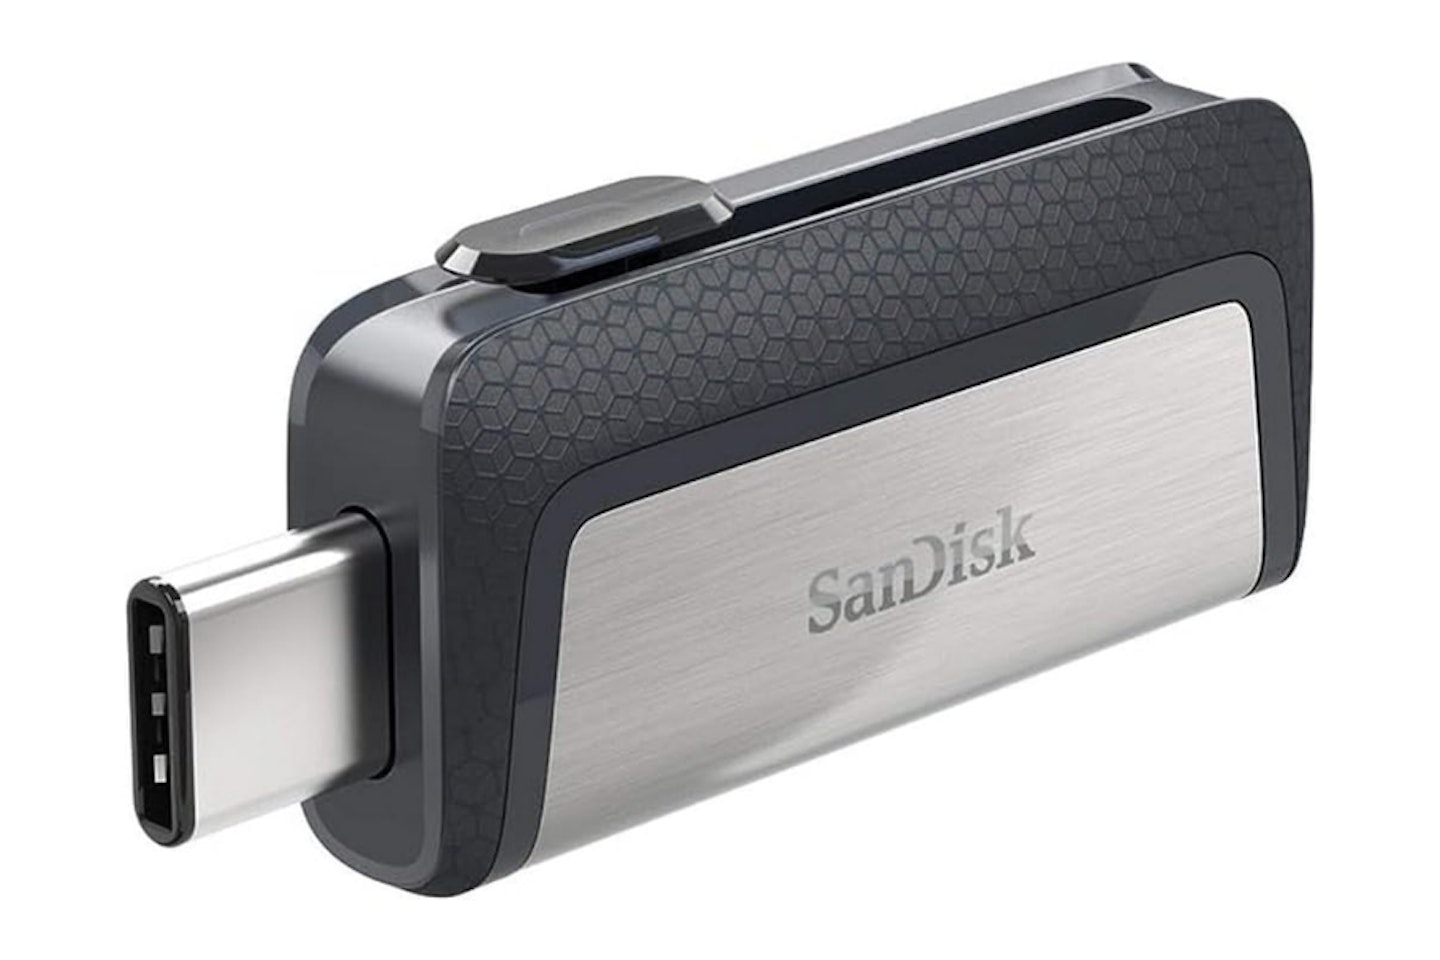 SanDisk 256GB Ultra Dual Drive USB Type-C Flash Drive - one of the best SanDisk USB stick devices